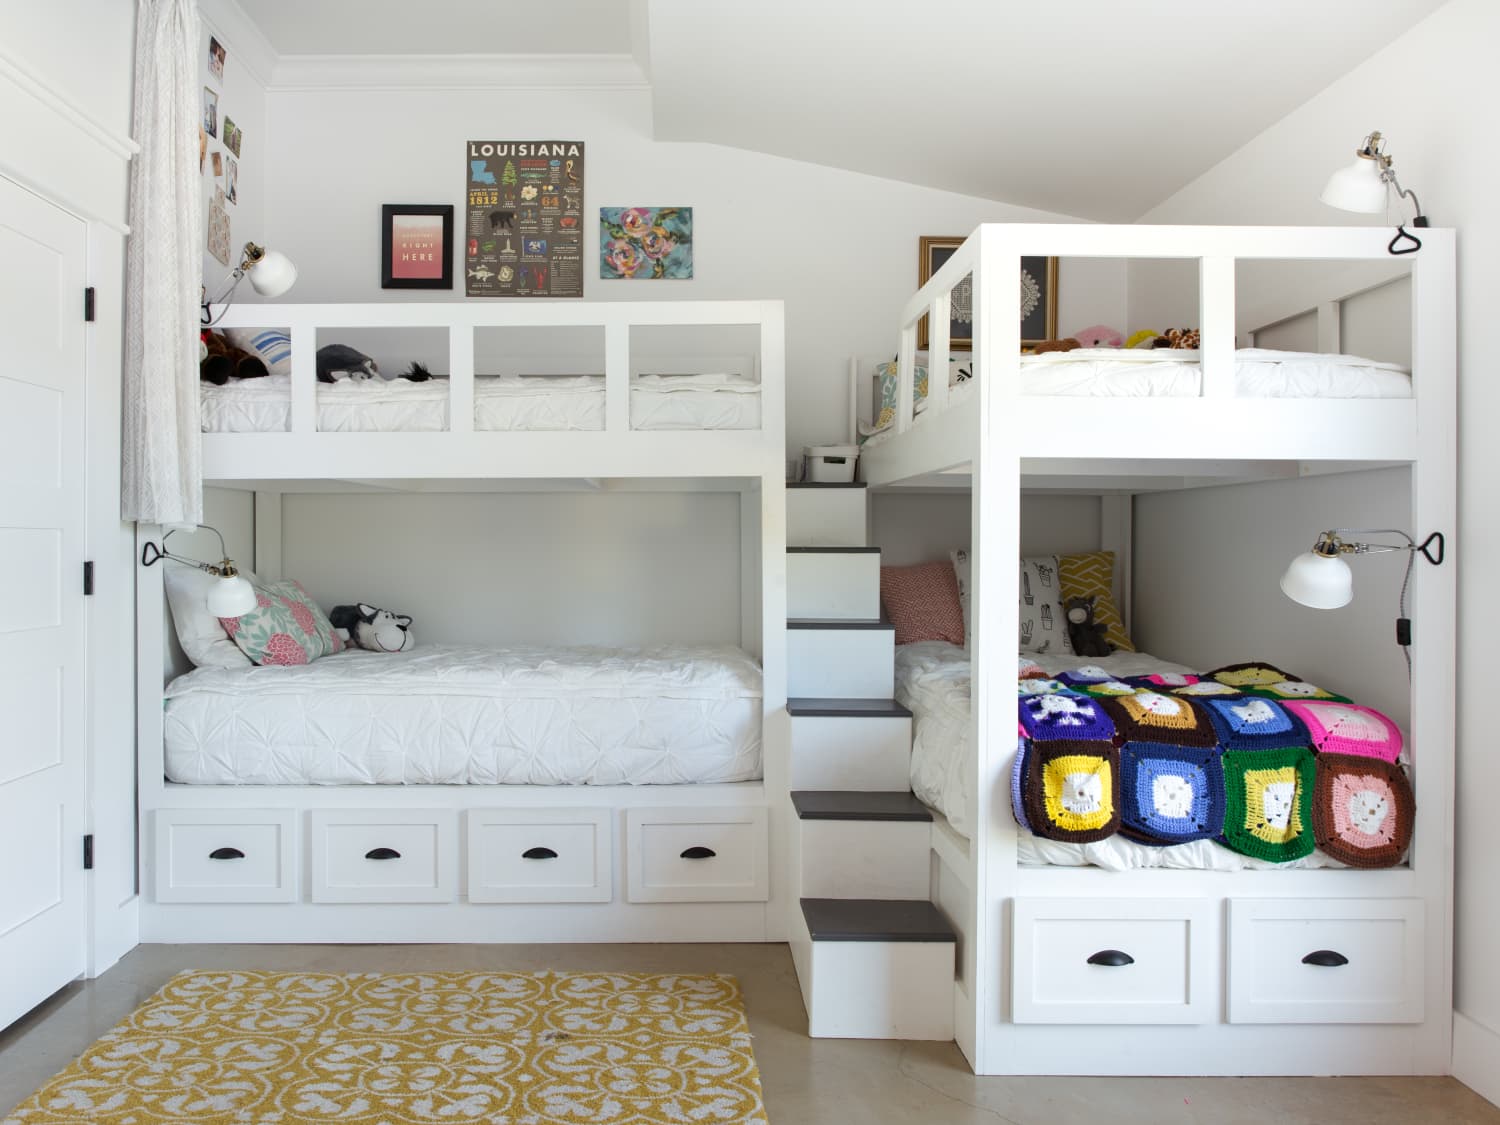 10 Best Bunk Beds With Storage 2022: Drawers, Closets, Desks | Cubby